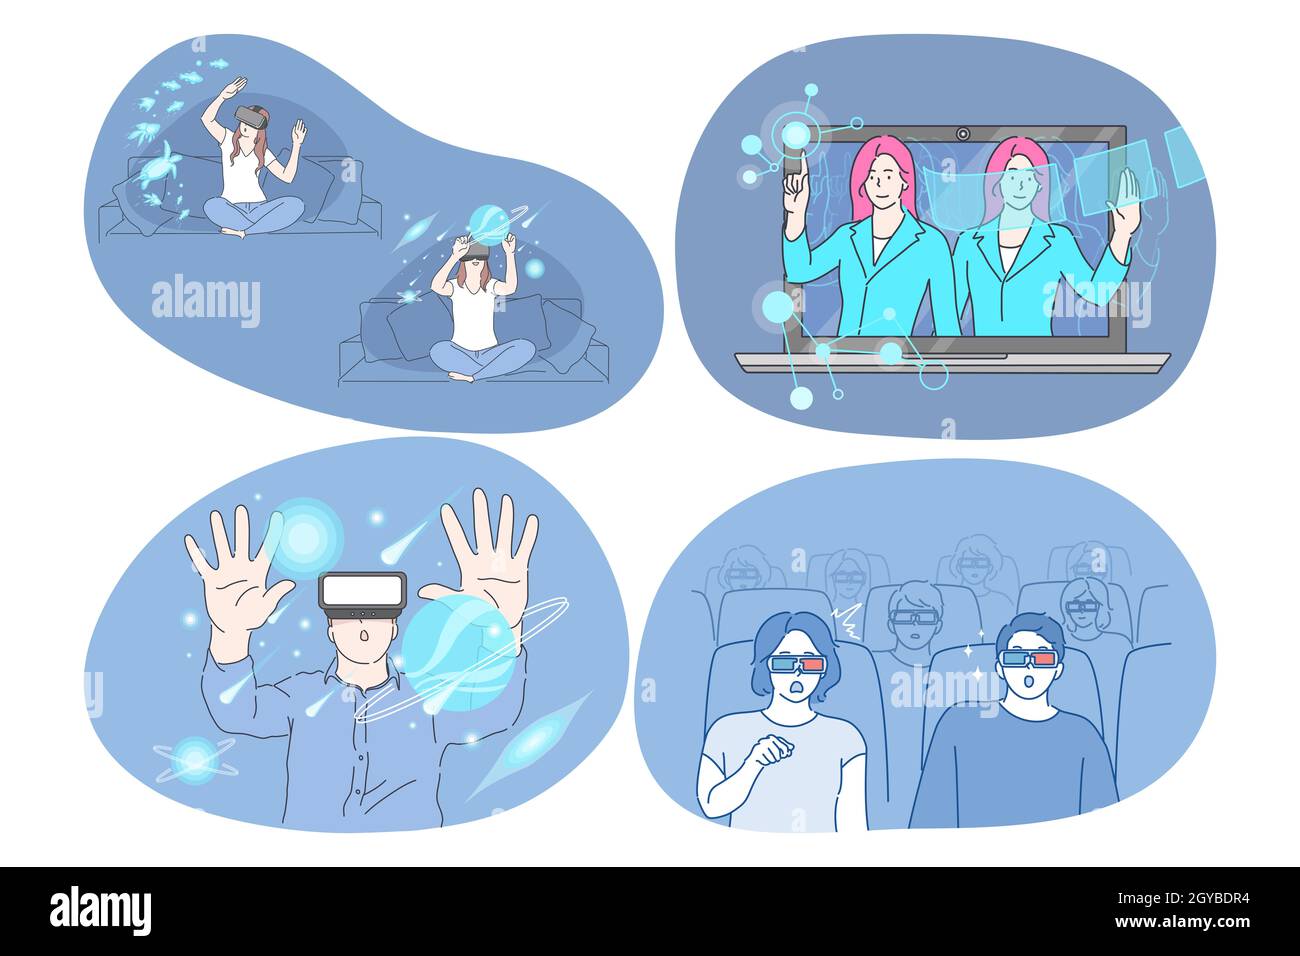 Virtual reality and cyberspace through 3d glasses concept. Young surprised women and men wearing special masks and glasses for simulation cyberspace t Stock Photo